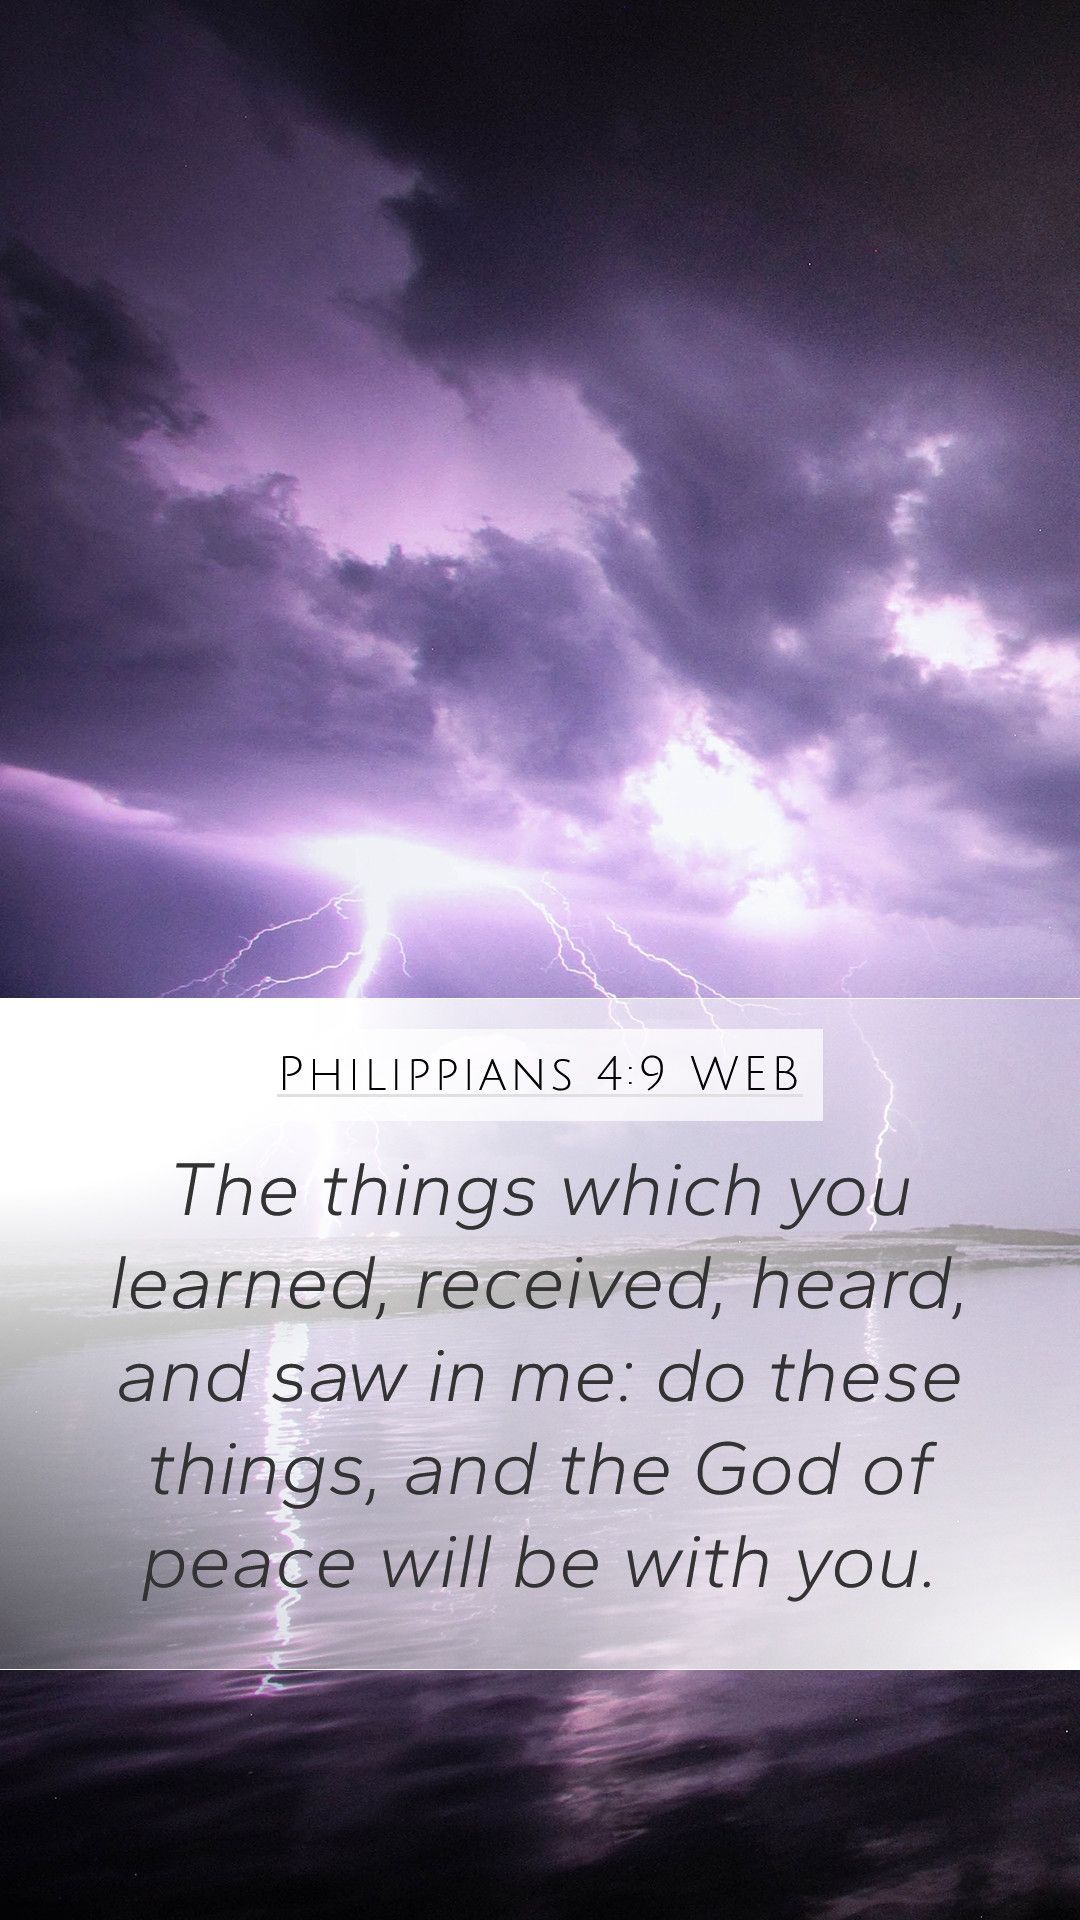 Philippians 4:9 WEB - The things which you learned, received, heard, and saw in me: do these things, and the God of peace will be with you. - Peace